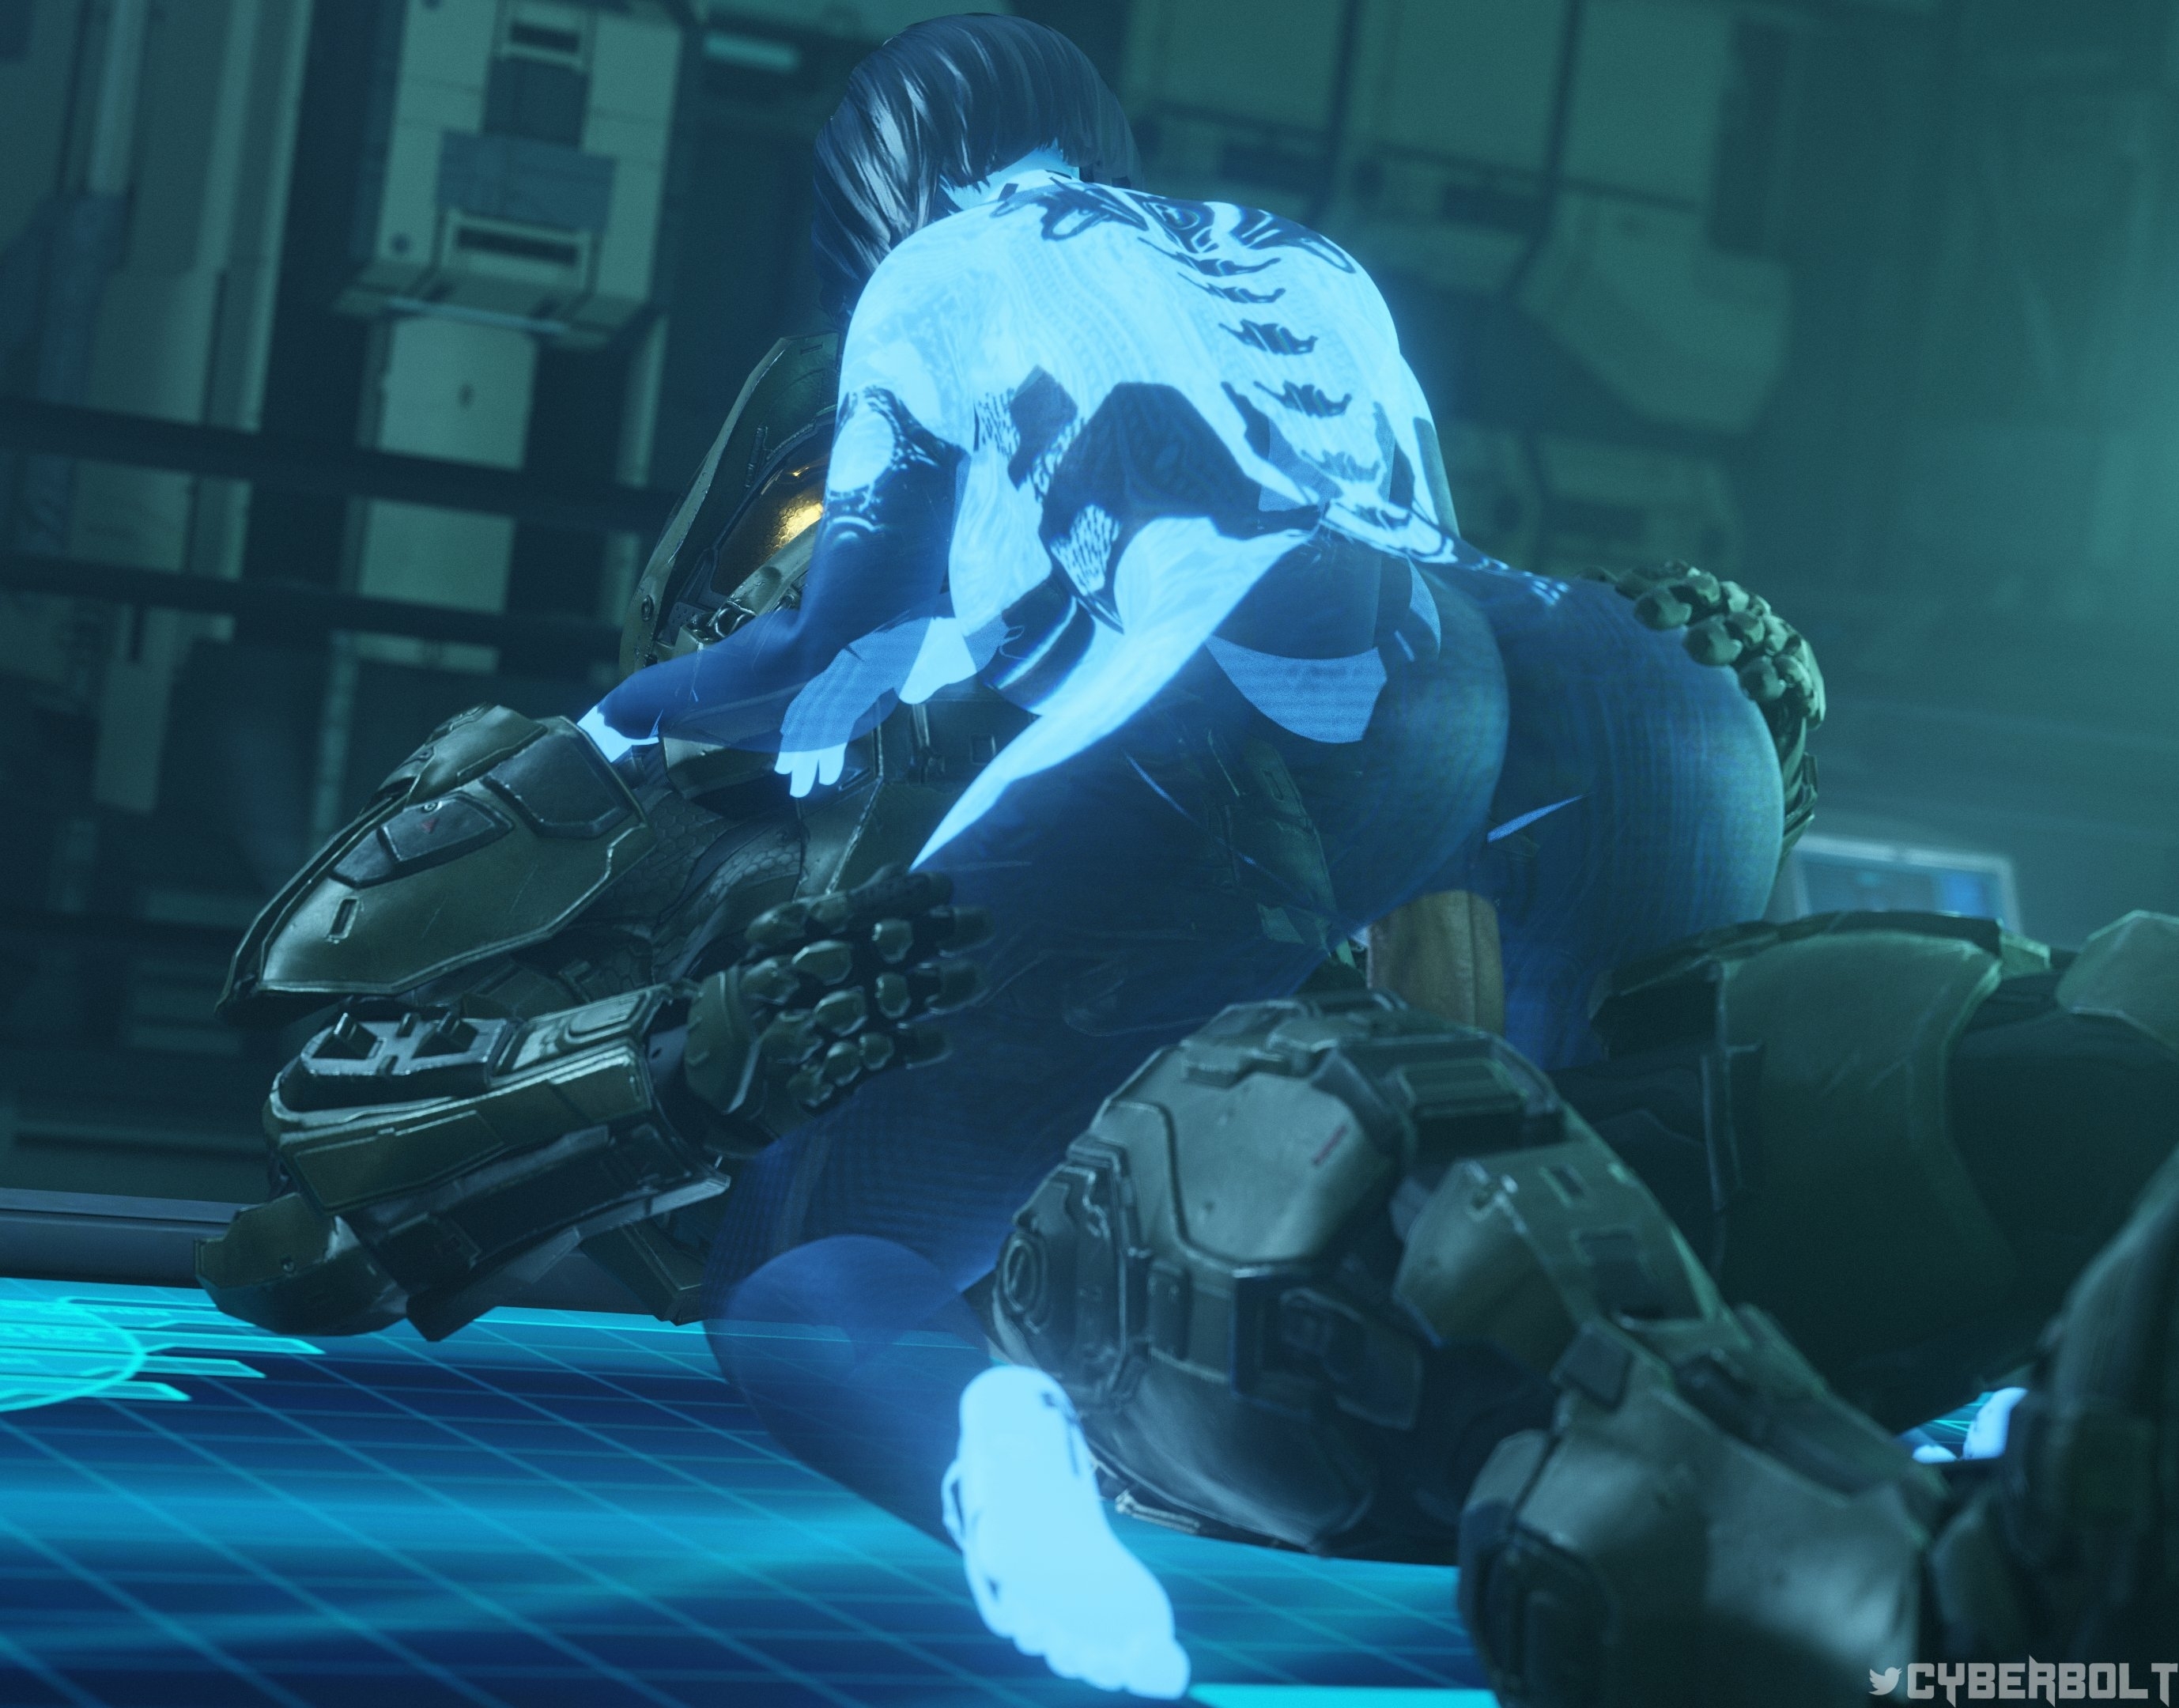 To celebrate the Halo Infinite launch  here s a totally non lewd image set Halo Elite (halo) Big Dick Dick Vaginal Oral Sex Big boobs Tits Ass Big Ass Cake Sexy Horny Face Horny 3d Porn 2